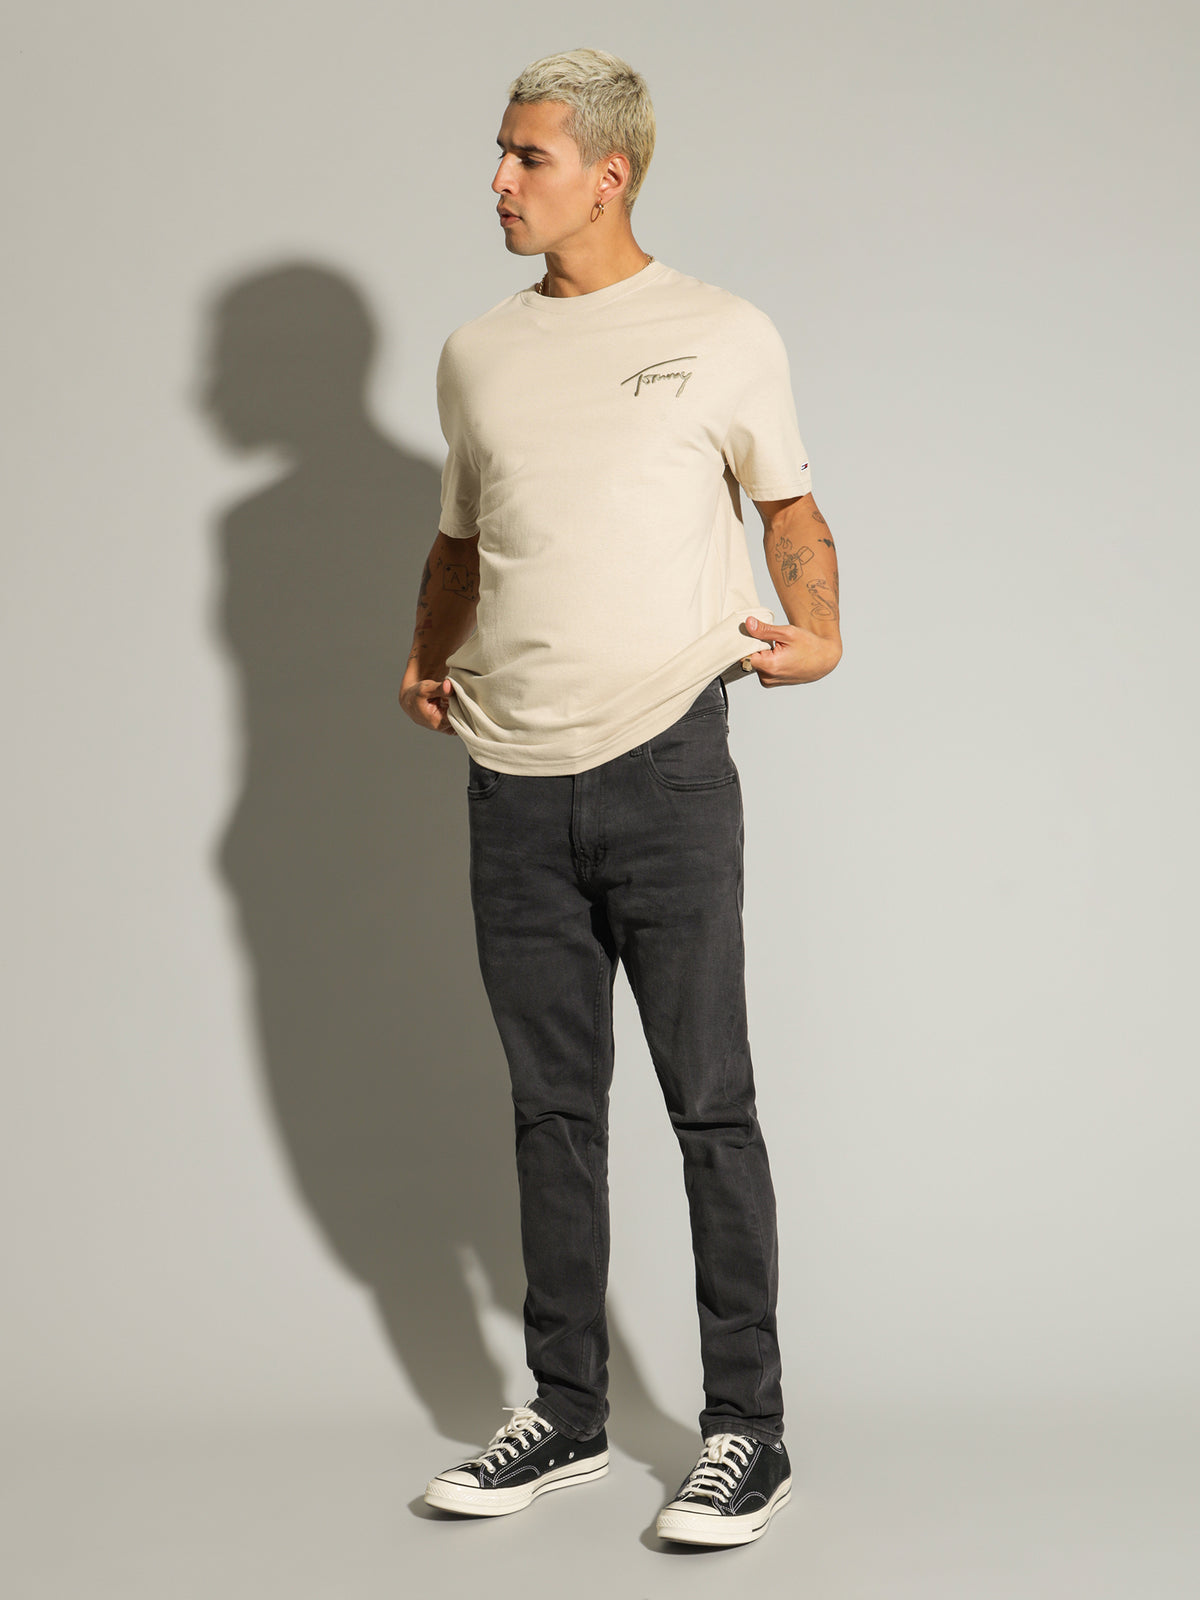 SIGNATURE Logo Recycled Cotton T-Shirt in Savannah Sand